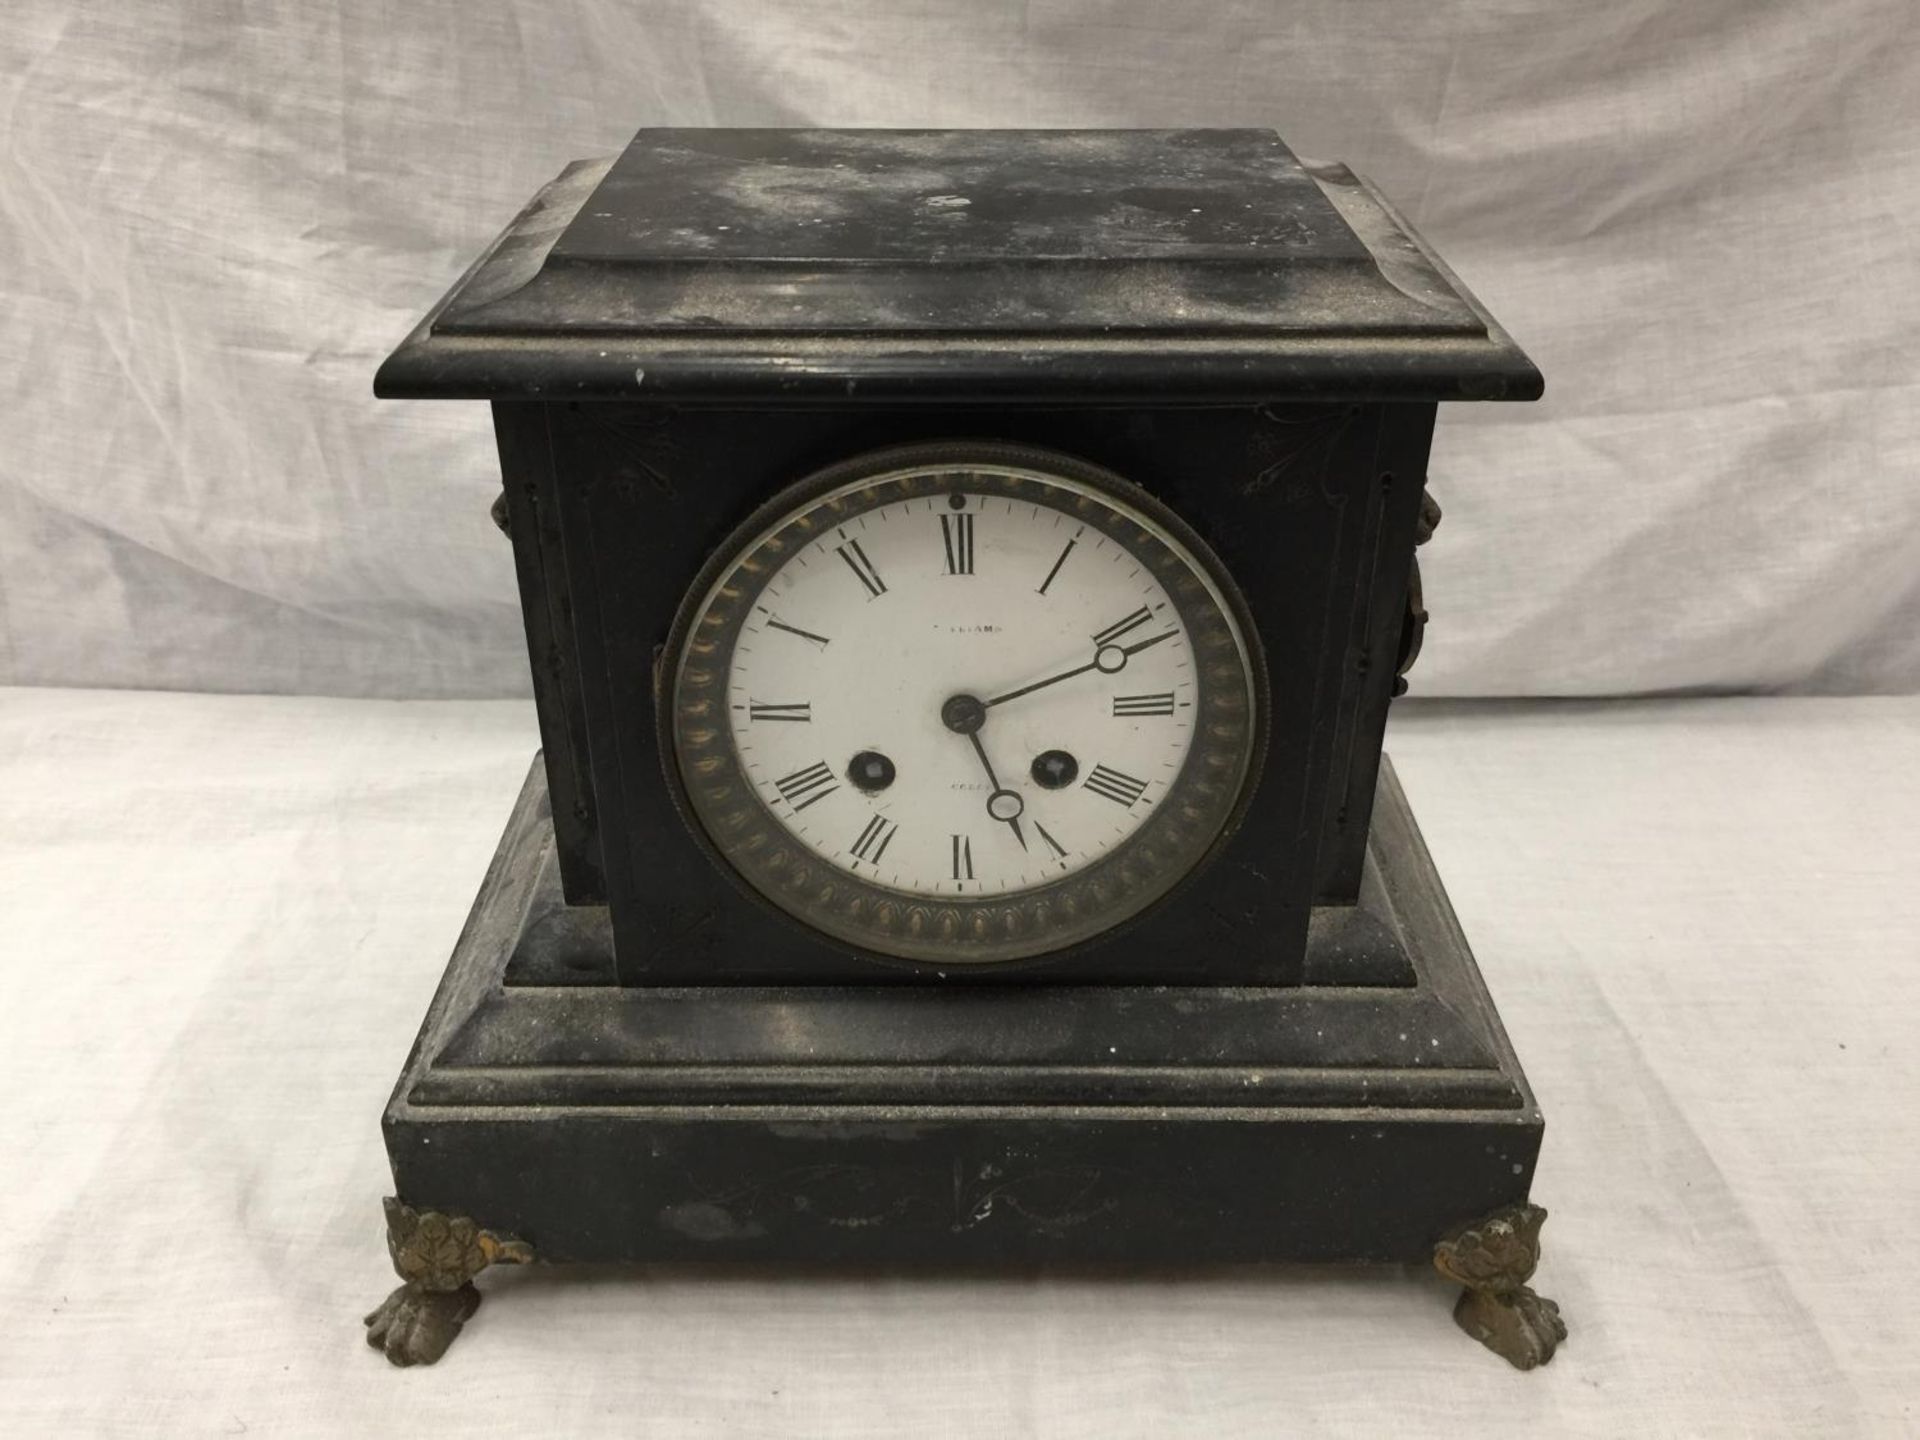 A HEAVY VINTAGE MANTEL CLOCK WITH BRASS DECORATION AND CLAW FEET